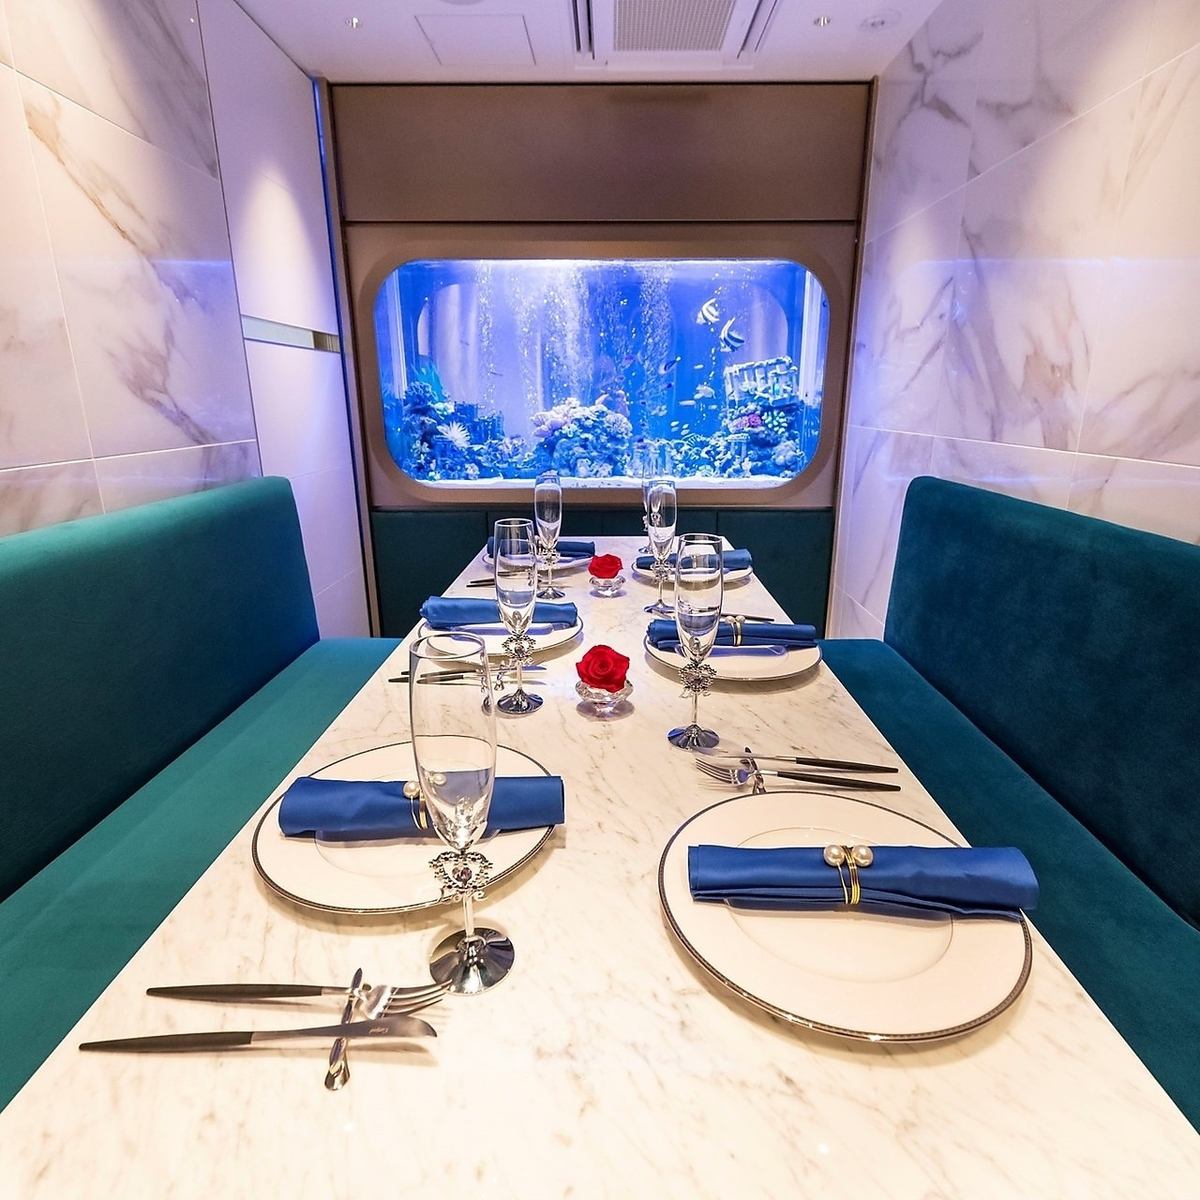 A complete private room that is healed by a large cobalt blue aquarium that feels like you are in the sea